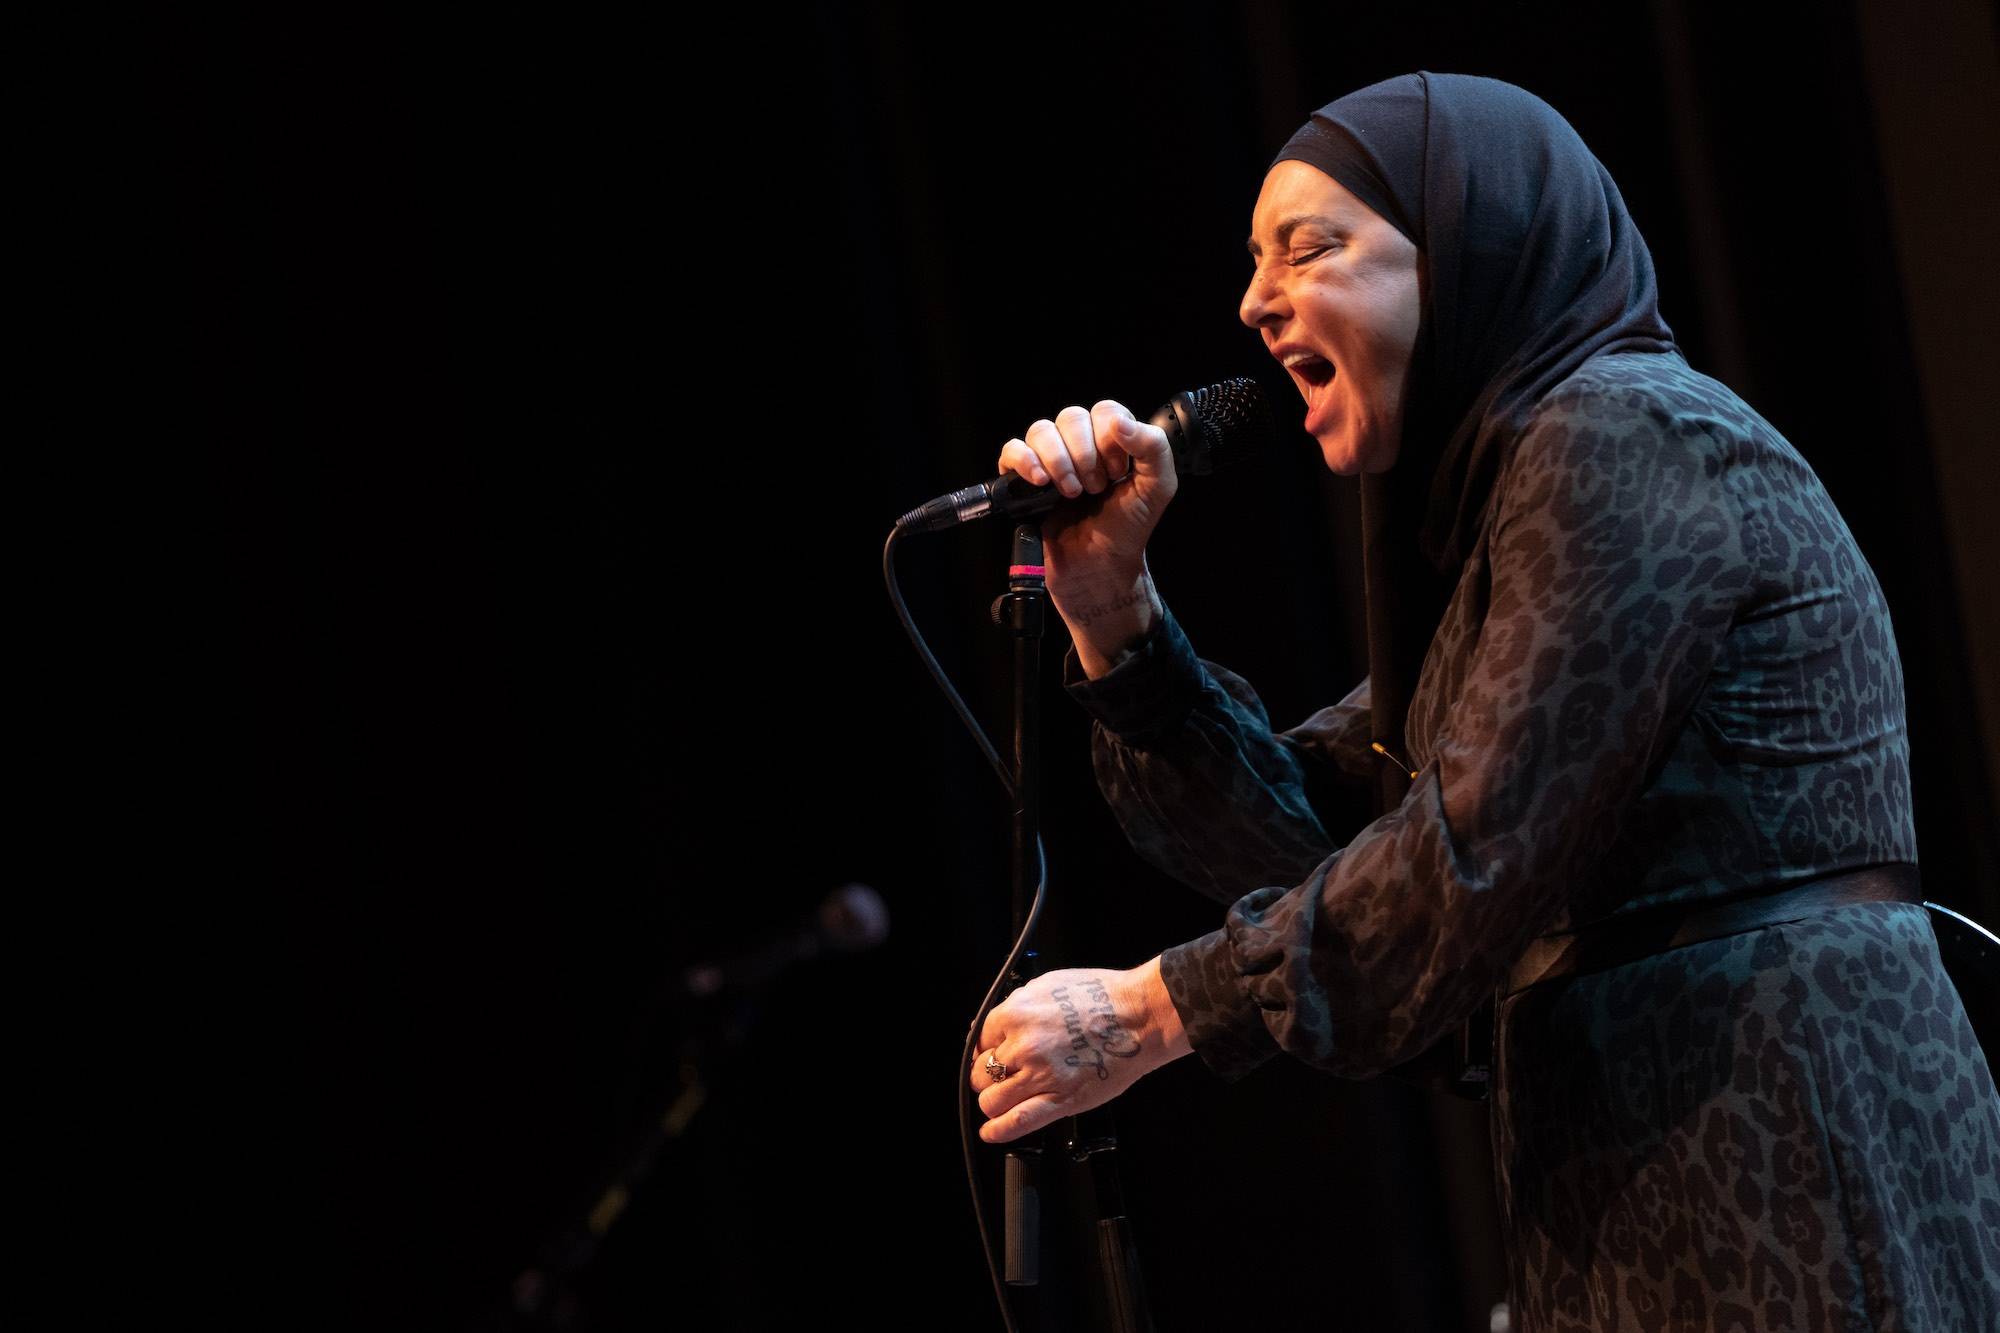 Sinead O’Connor at the Vogue Theatre, Vancouver, Feb 1 2020. Scott Alexander photo.